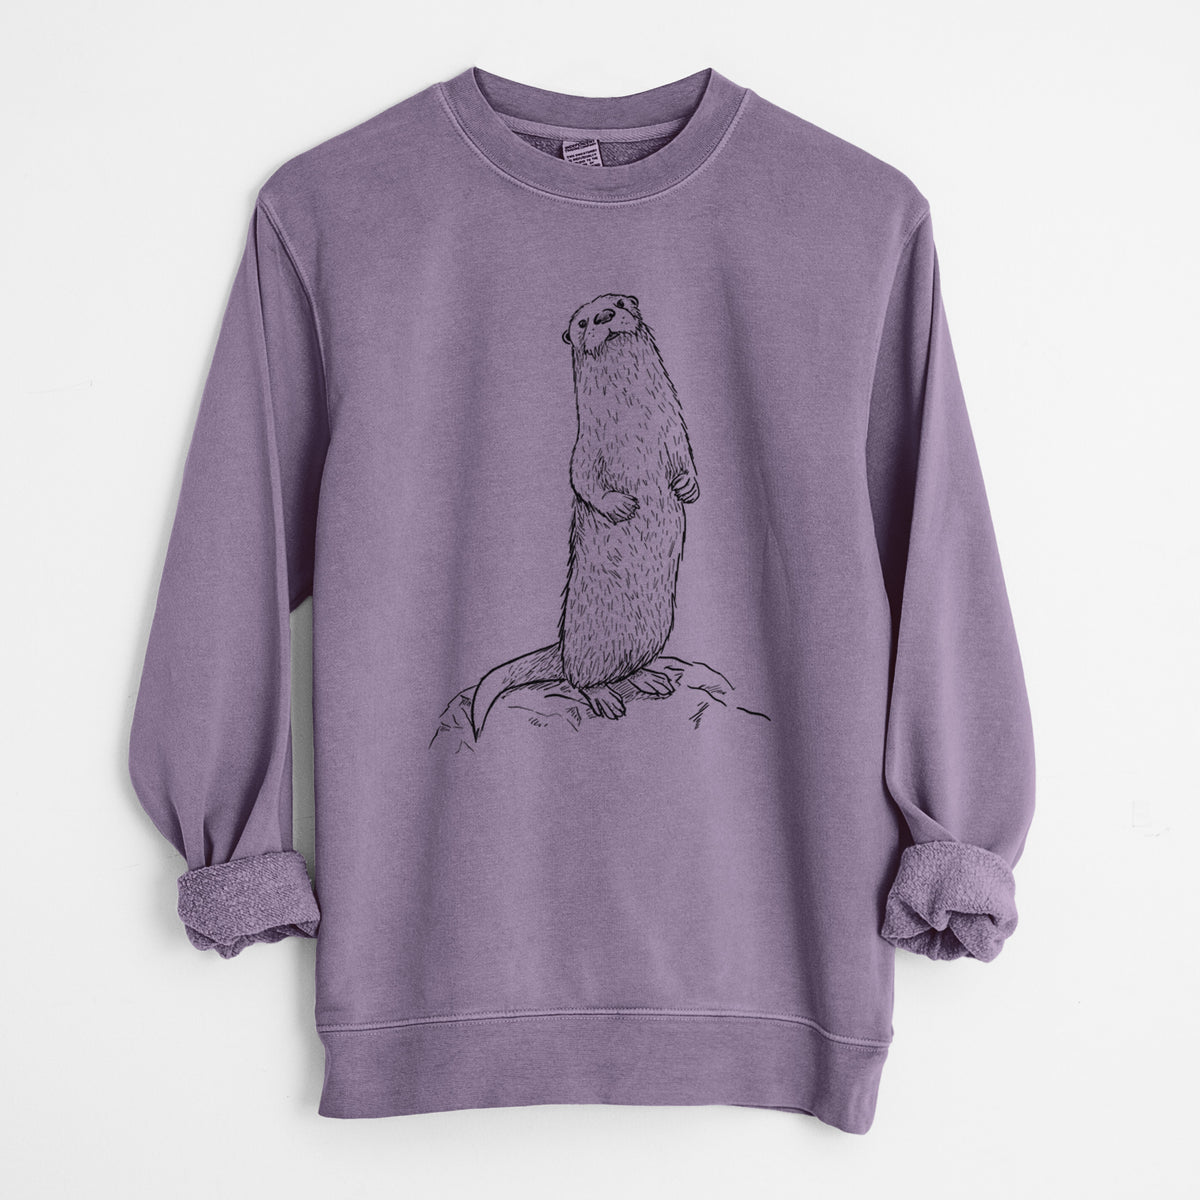 North American River Otter - Lontra canadensis - Unisex Pigment Dyed Crew Sweatshirt